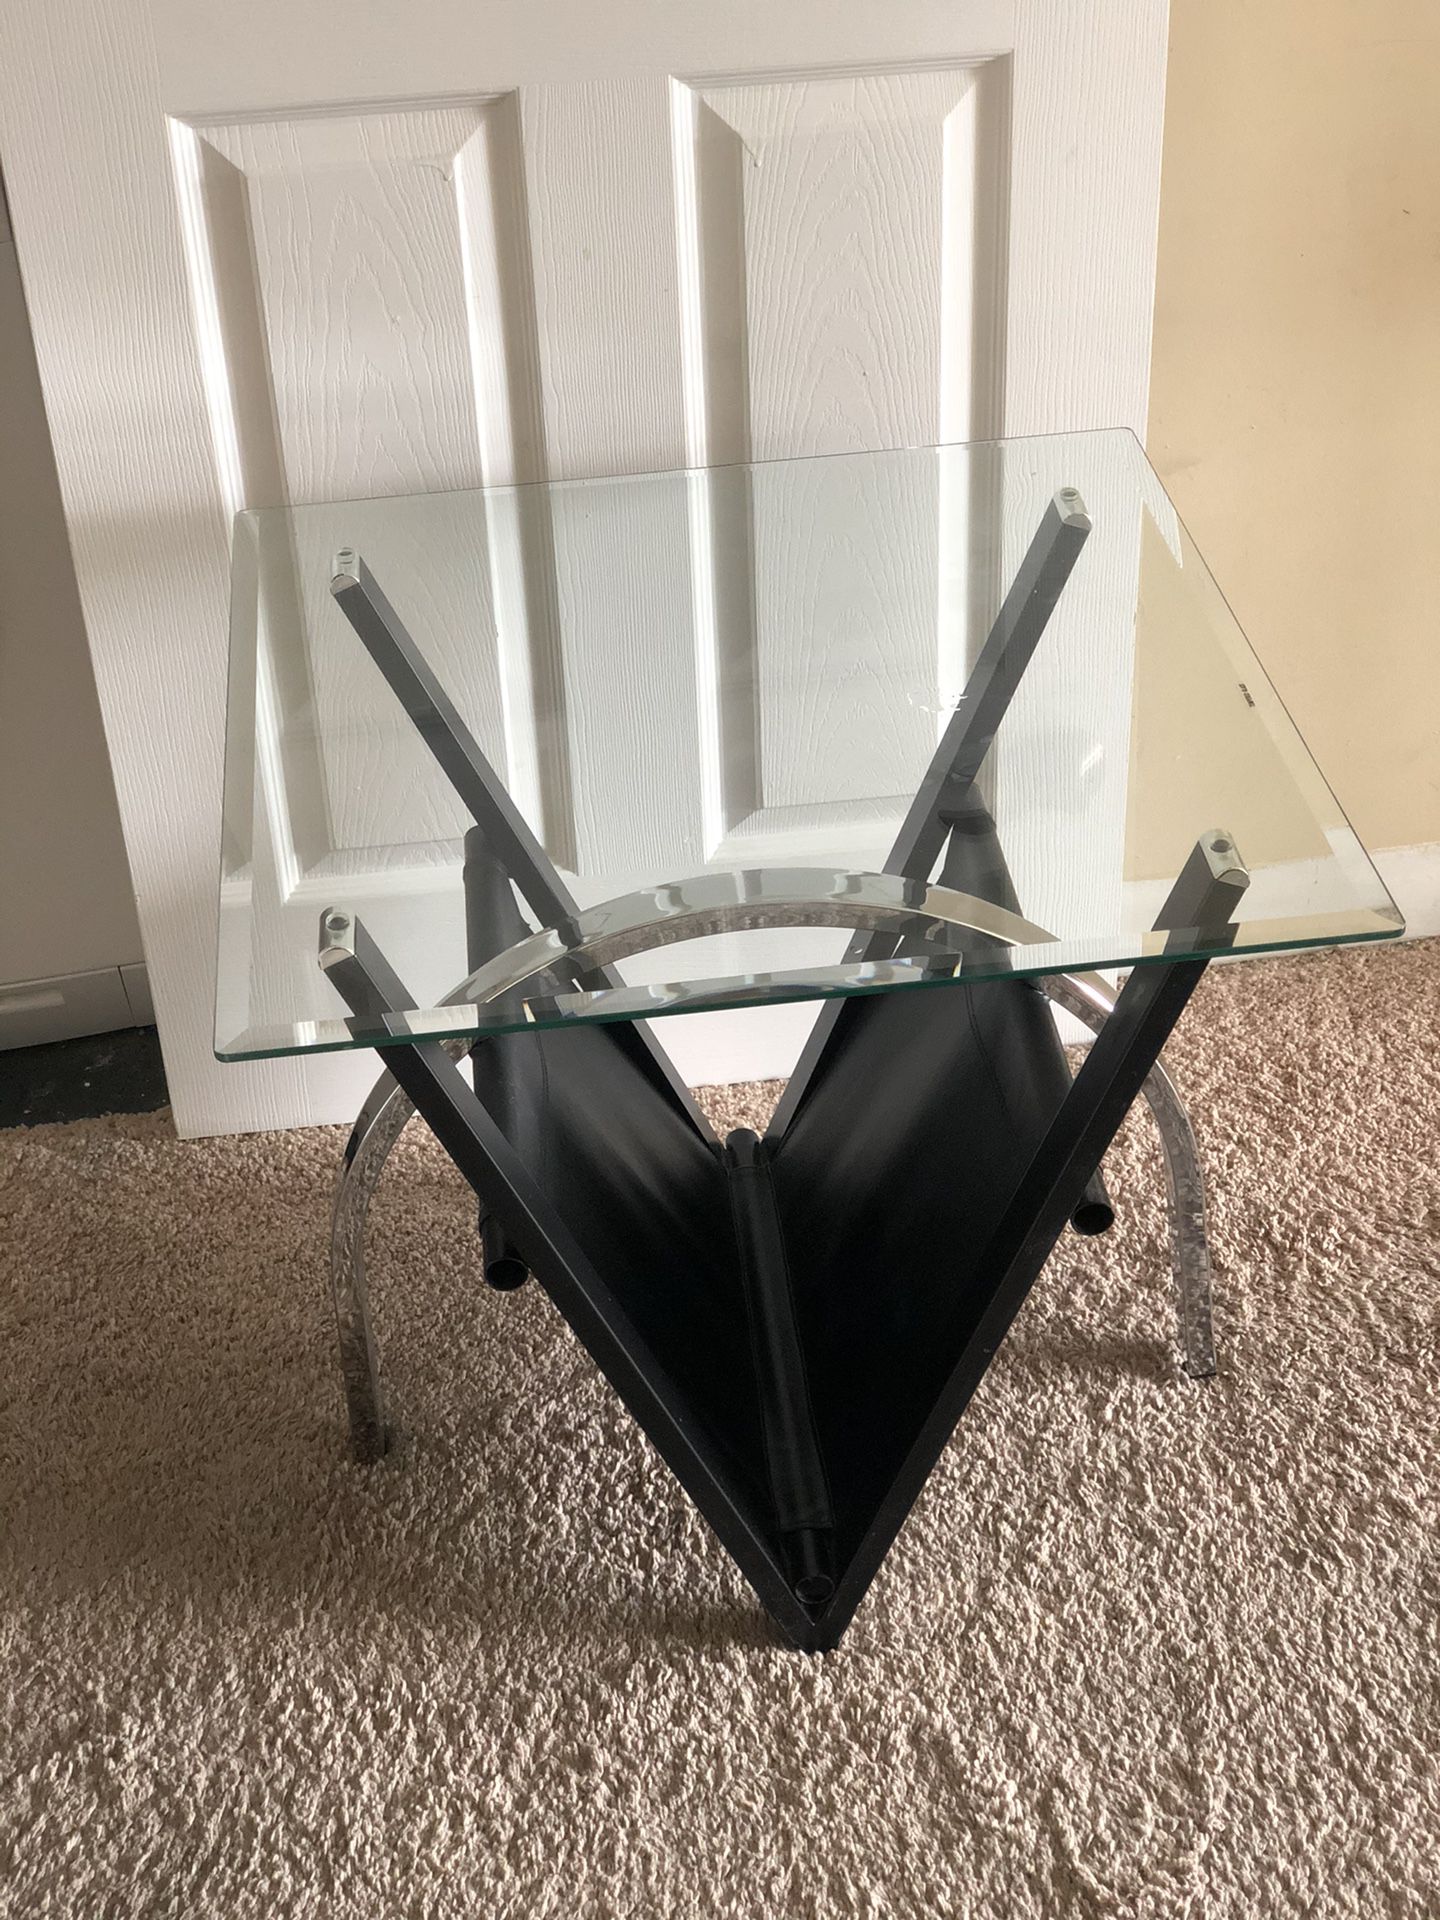 Glass side table